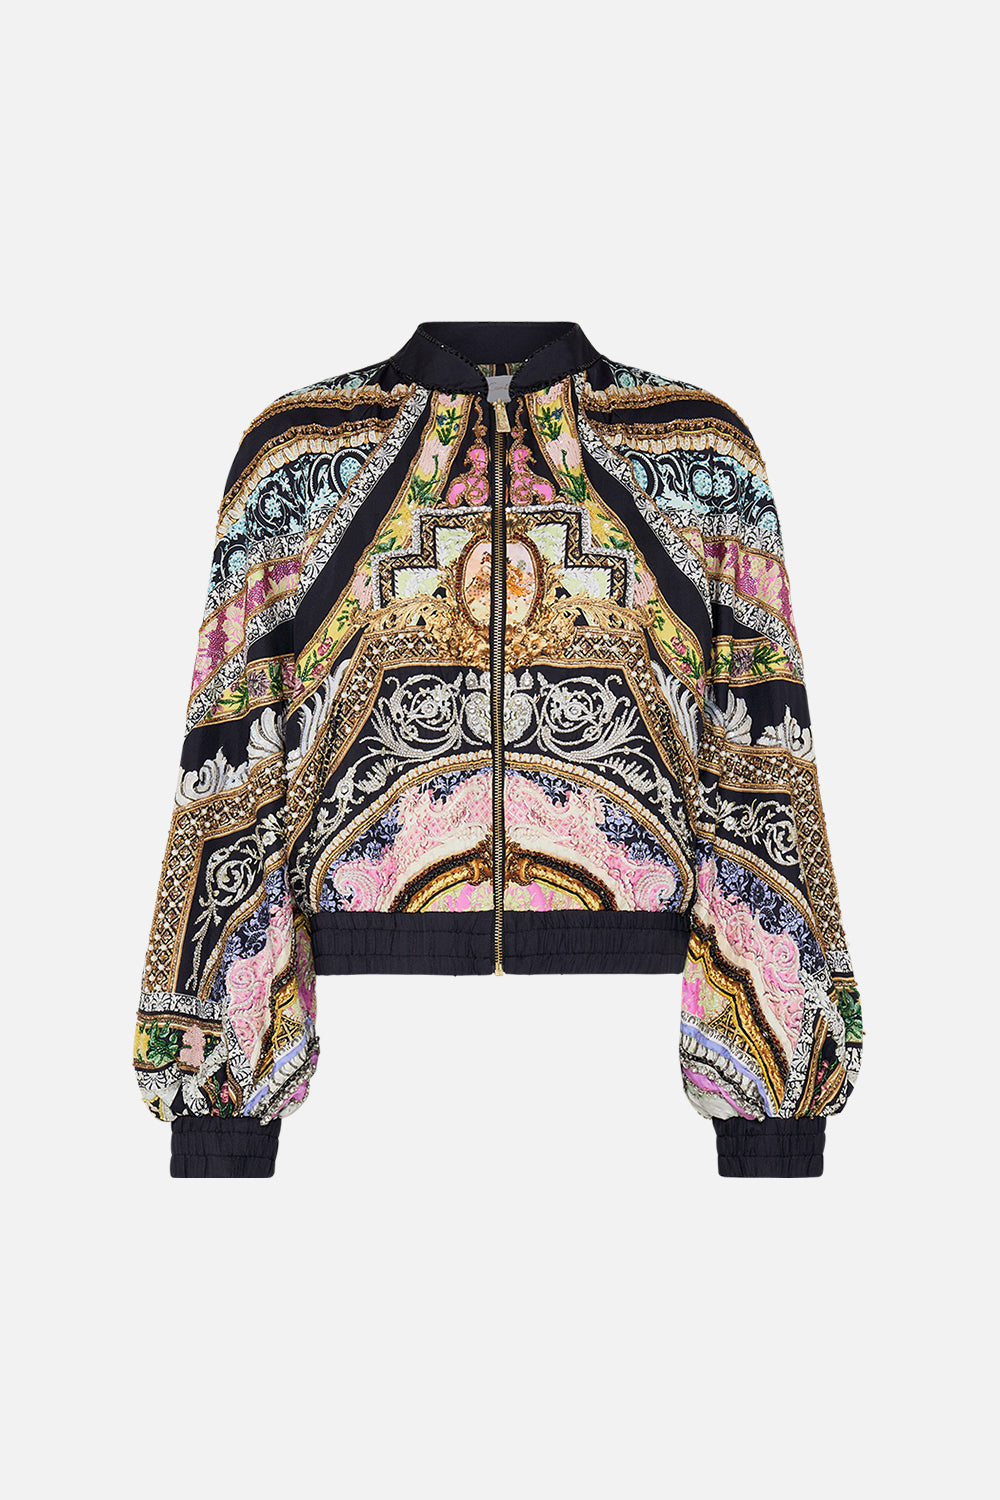 CAMILLA silk bomber jacket in Florence Field Day Print 